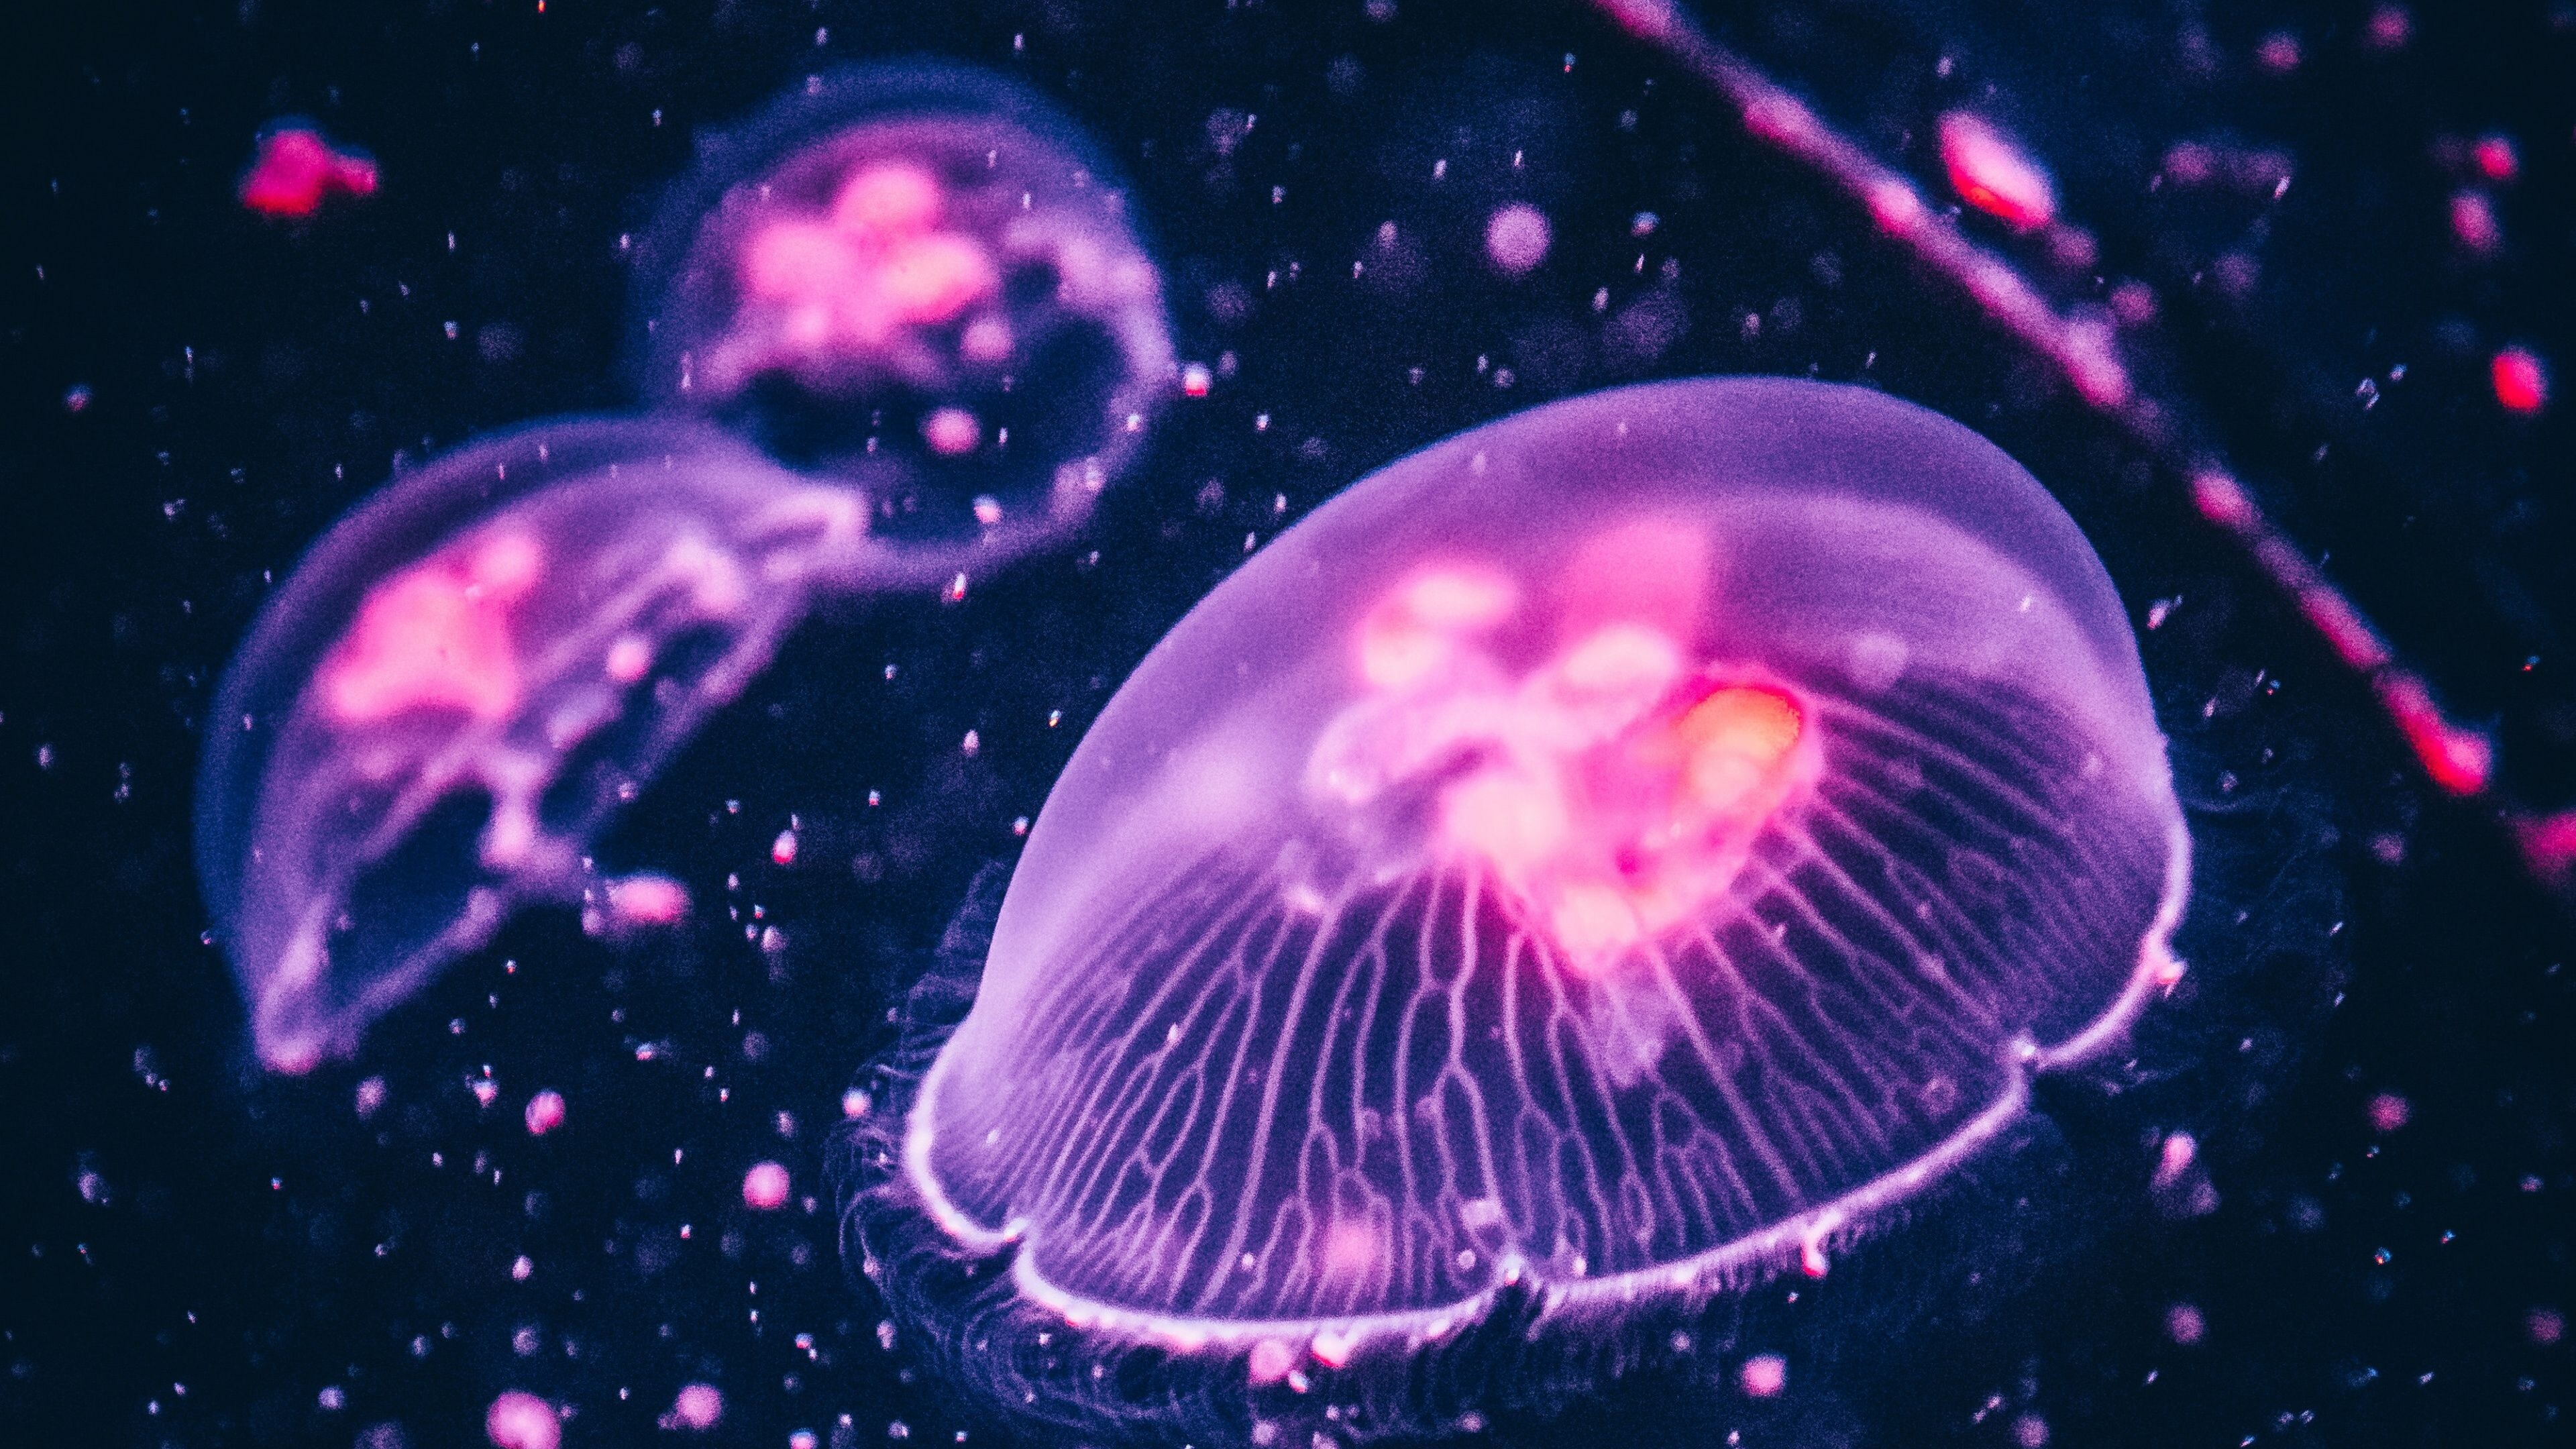 Glowing Jellyfish: Aequorea jellies, Bioluminescence, Light produced by a chemical process within a living organism. 3840x2160 4K Wallpaper.